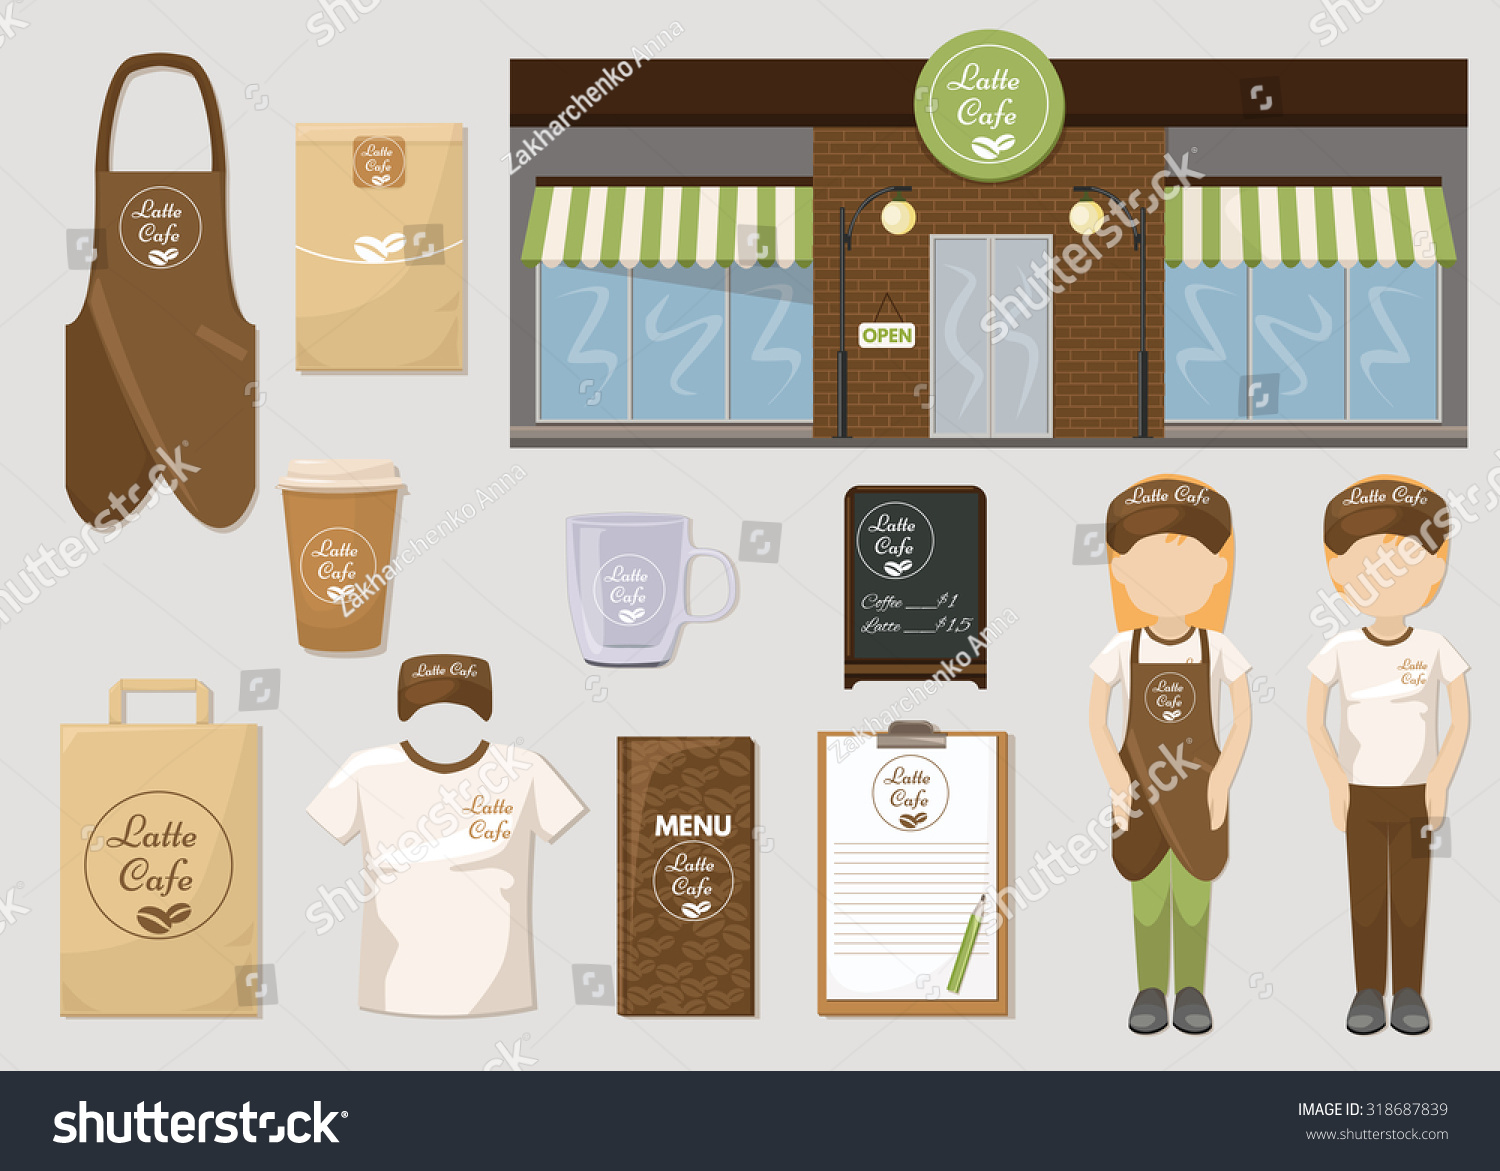 Set Cafe Restaurant Corporate Identity Mock Stock Vector Royalty Free 318687839 - cafe apron roblox